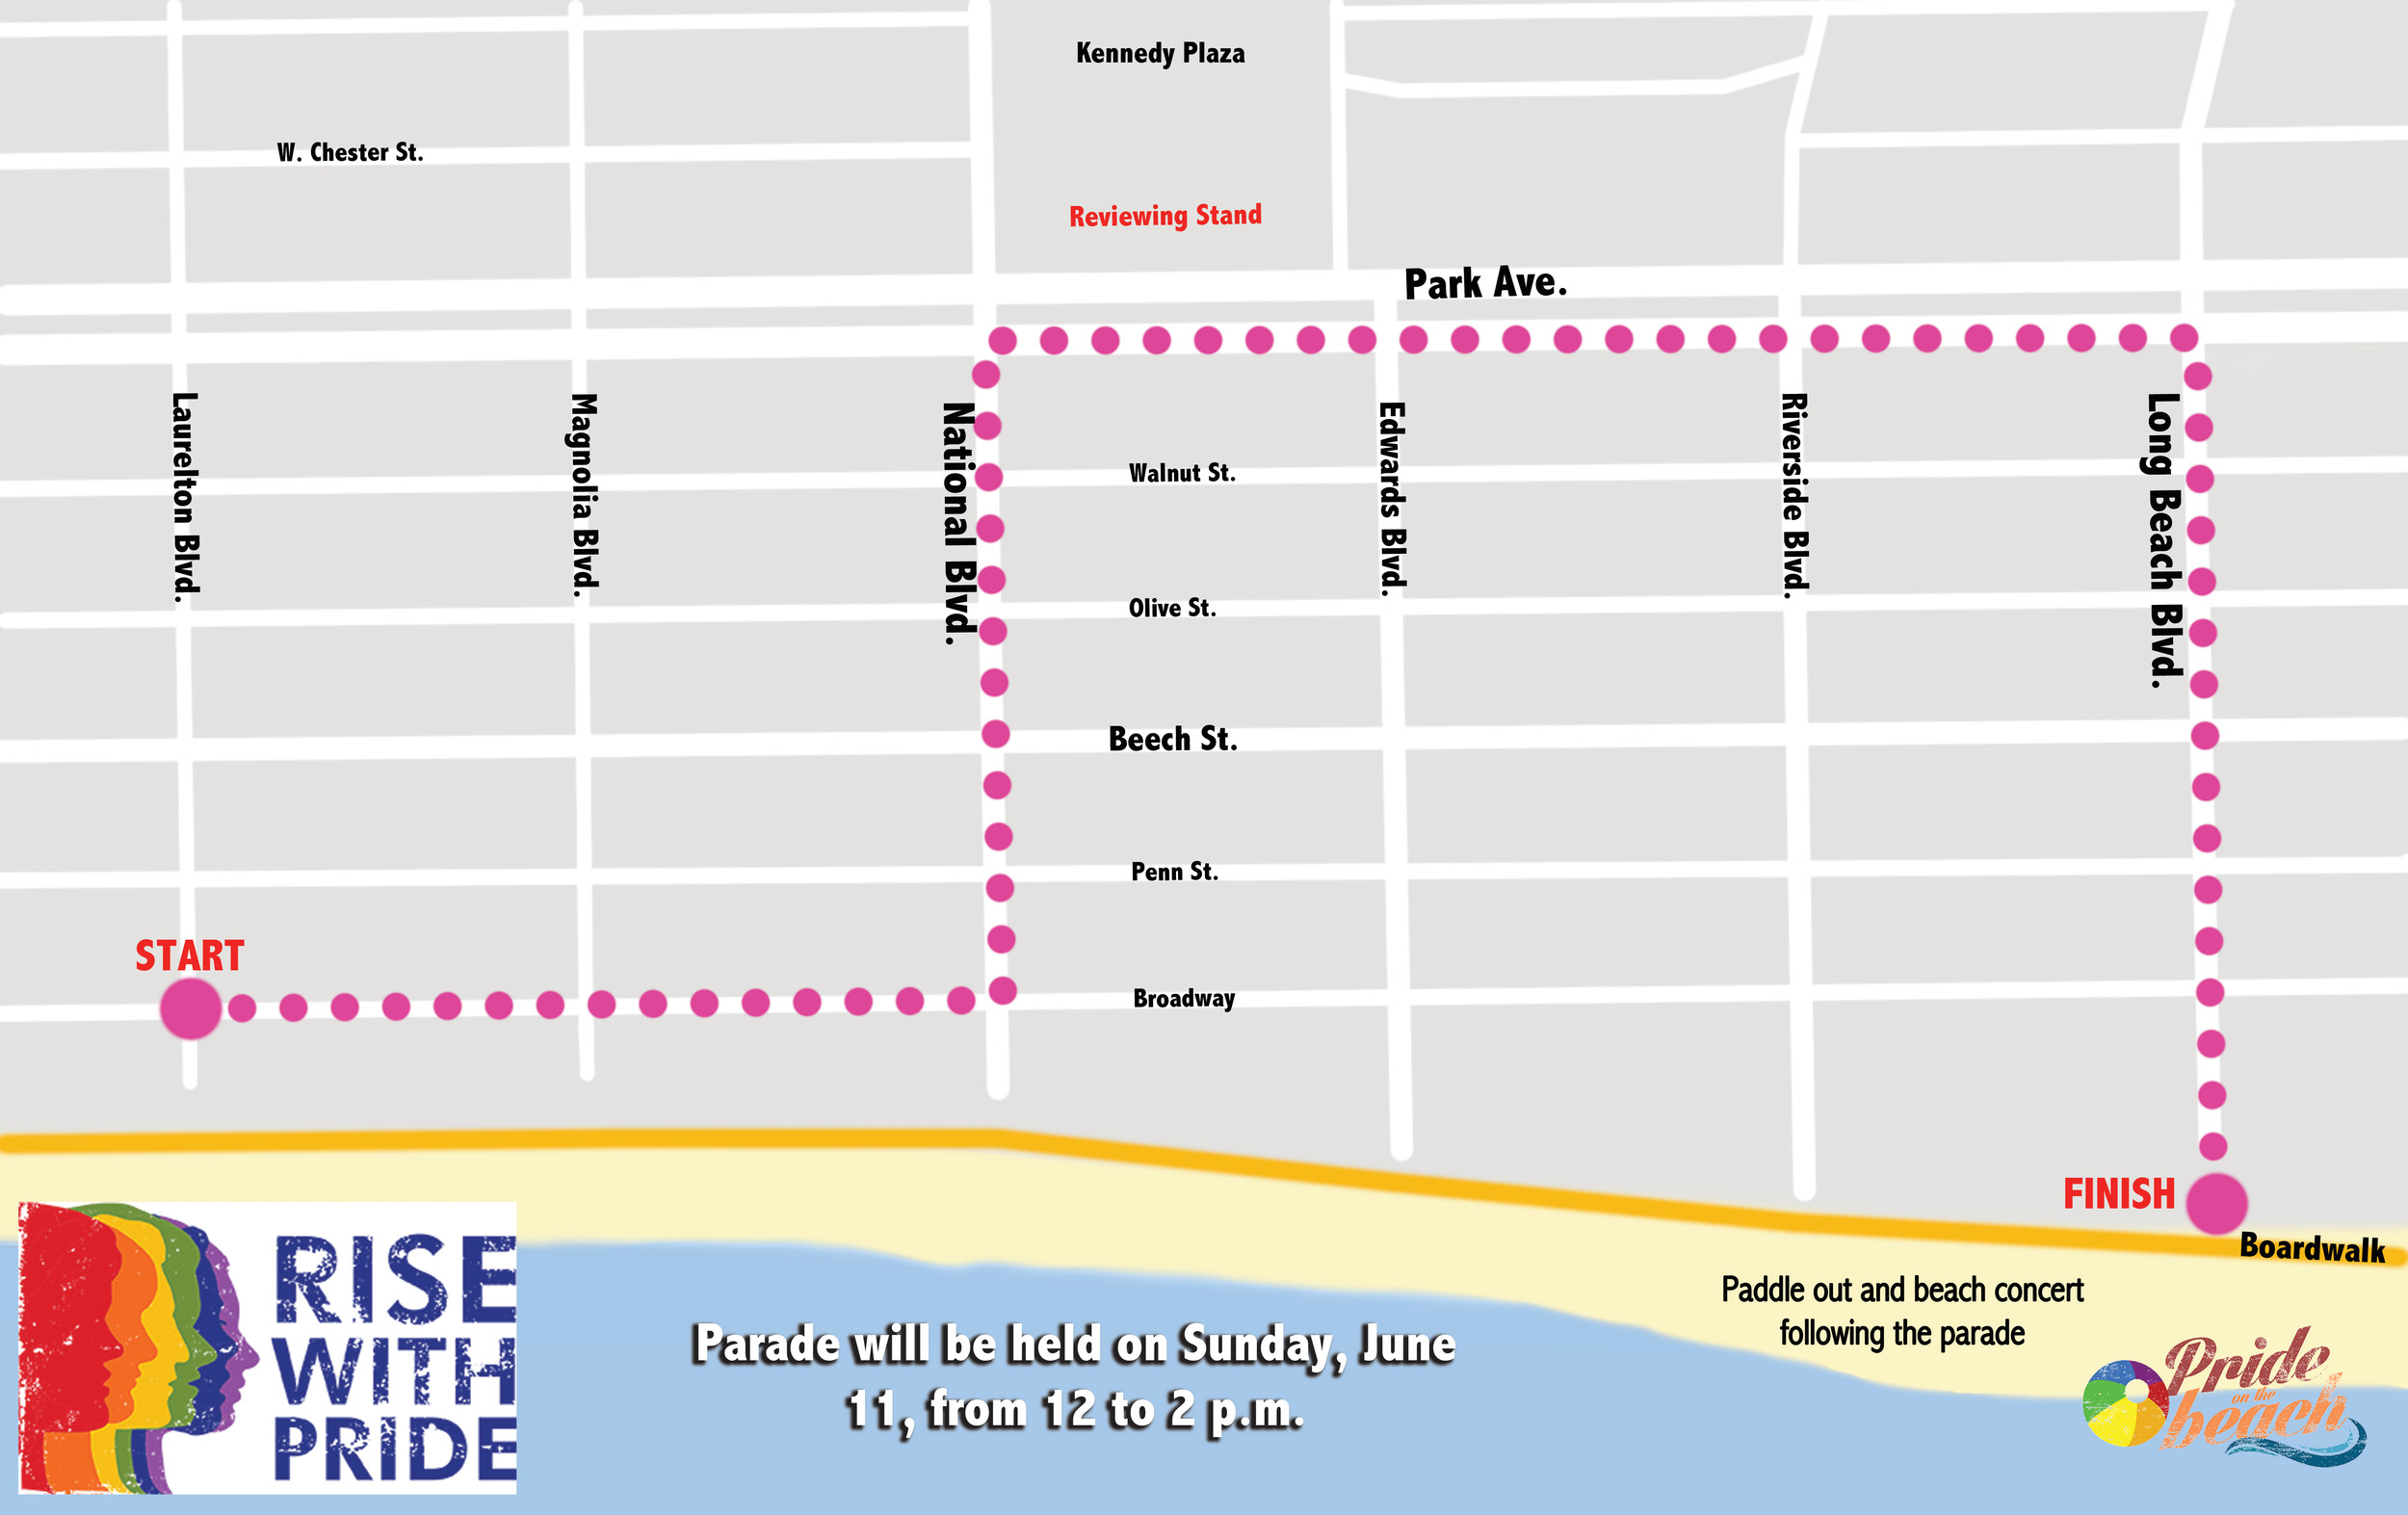 The Rise with Pride parade runs from noon to 1:15 p.m., and will feature floats, performers, student and professional marching bands, and more. The parade will close roads along the route. It will be followed by a beach concert from 1 to 6 p.m.